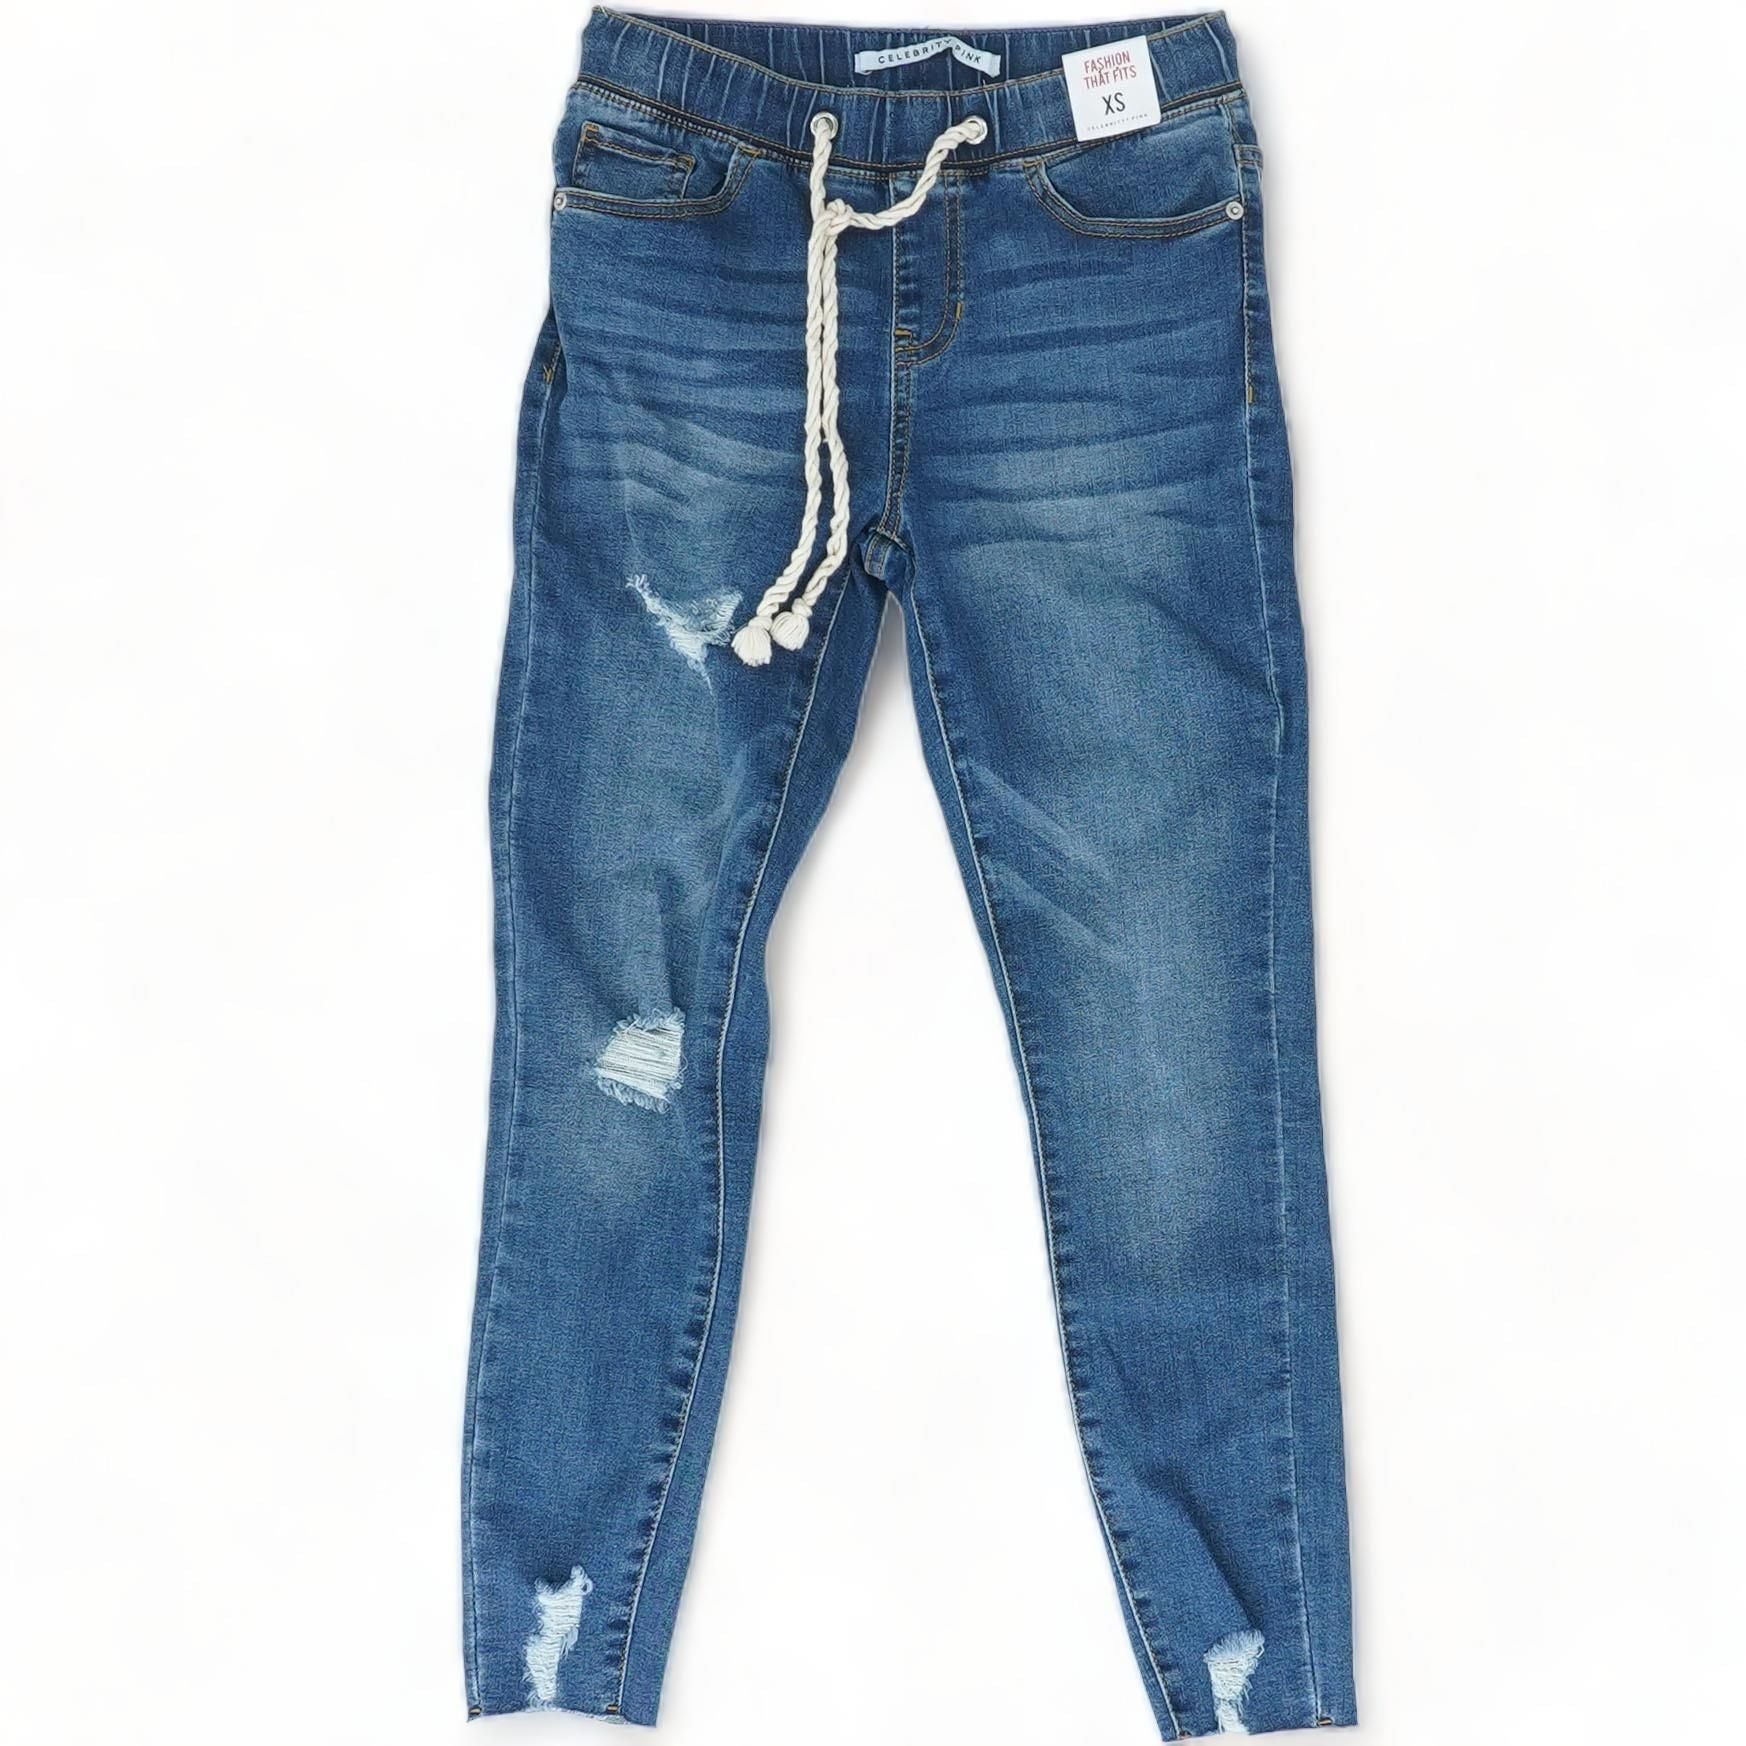 Blue Solid High Rise Skinny Leg Jeans – Unclaimed Baggage